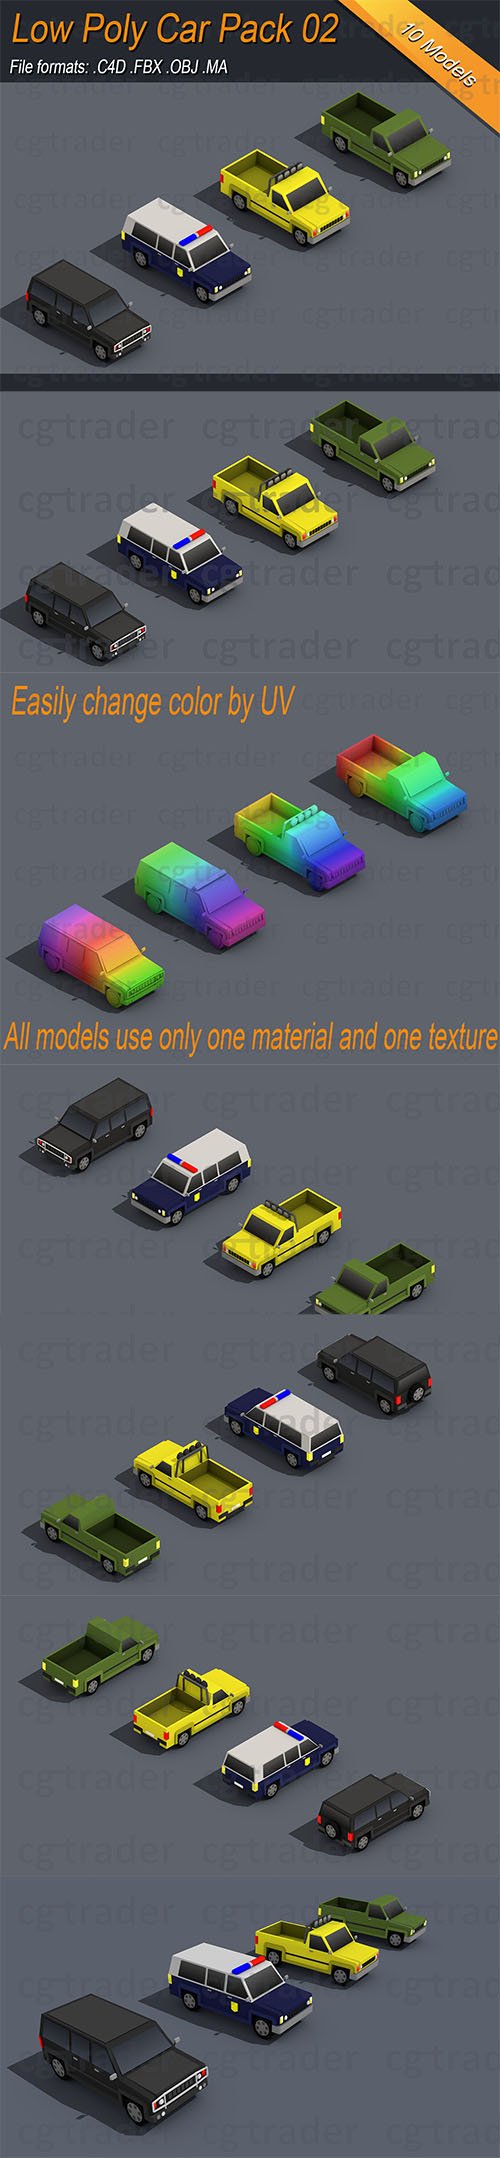 Low Poly Truck Pack 02 Isometric Low-poly 3D model